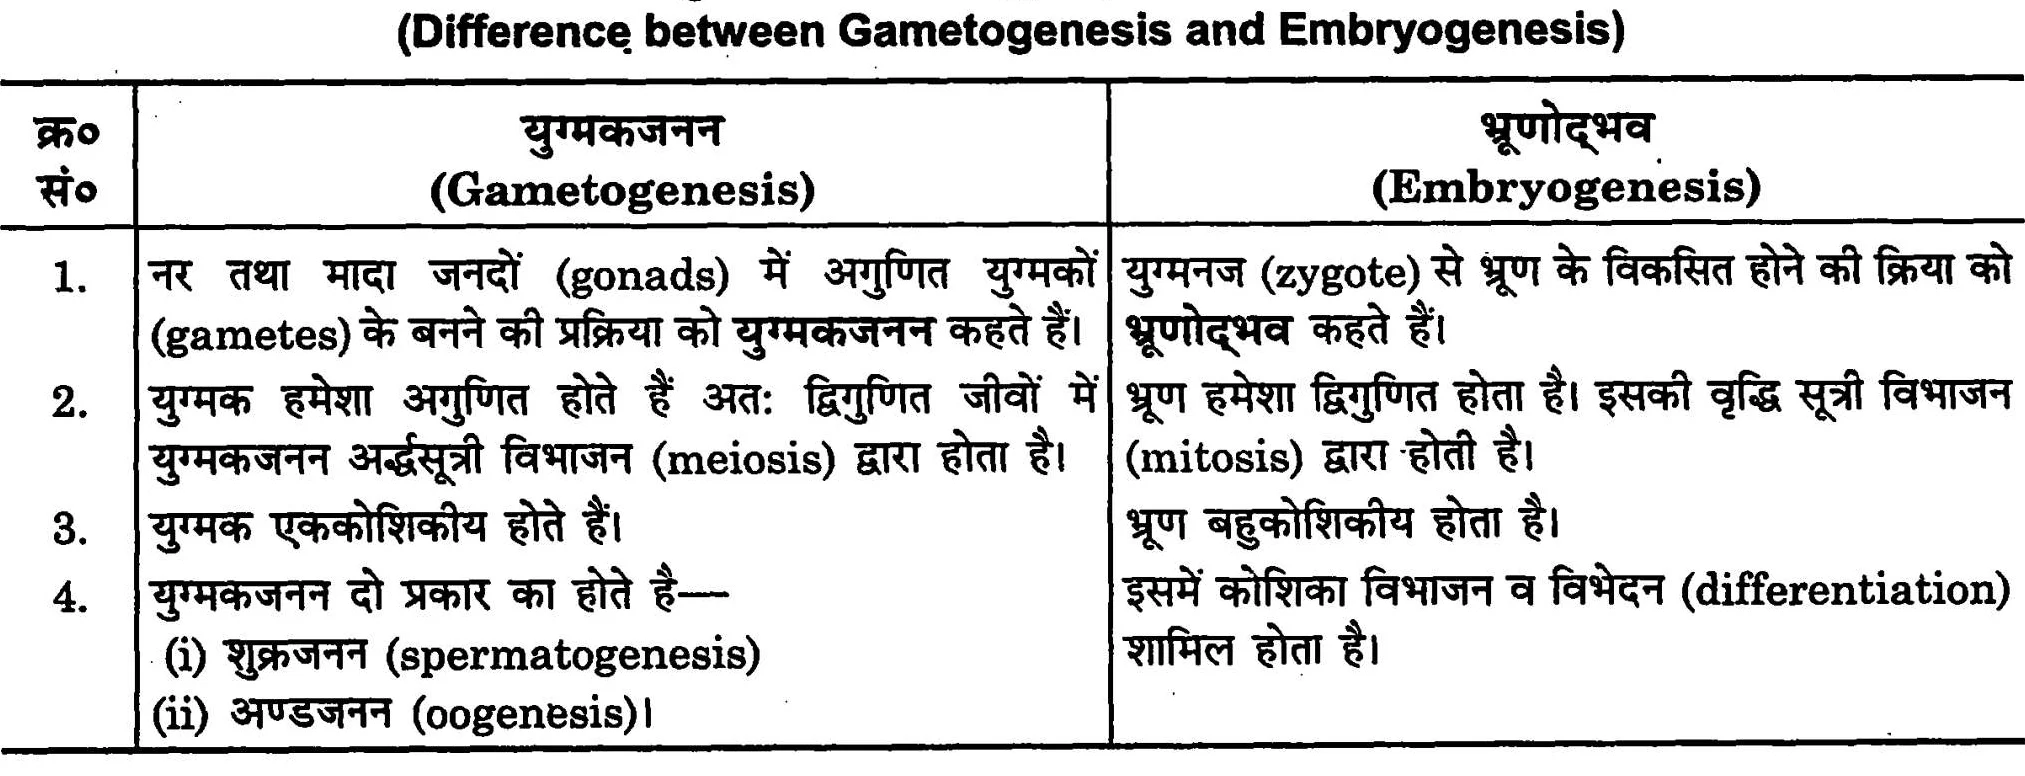 युग्मकजनन एवं भ्रूणोद्भव में अन्तर ( Difference between Gametogenesis and Embryogenesis )